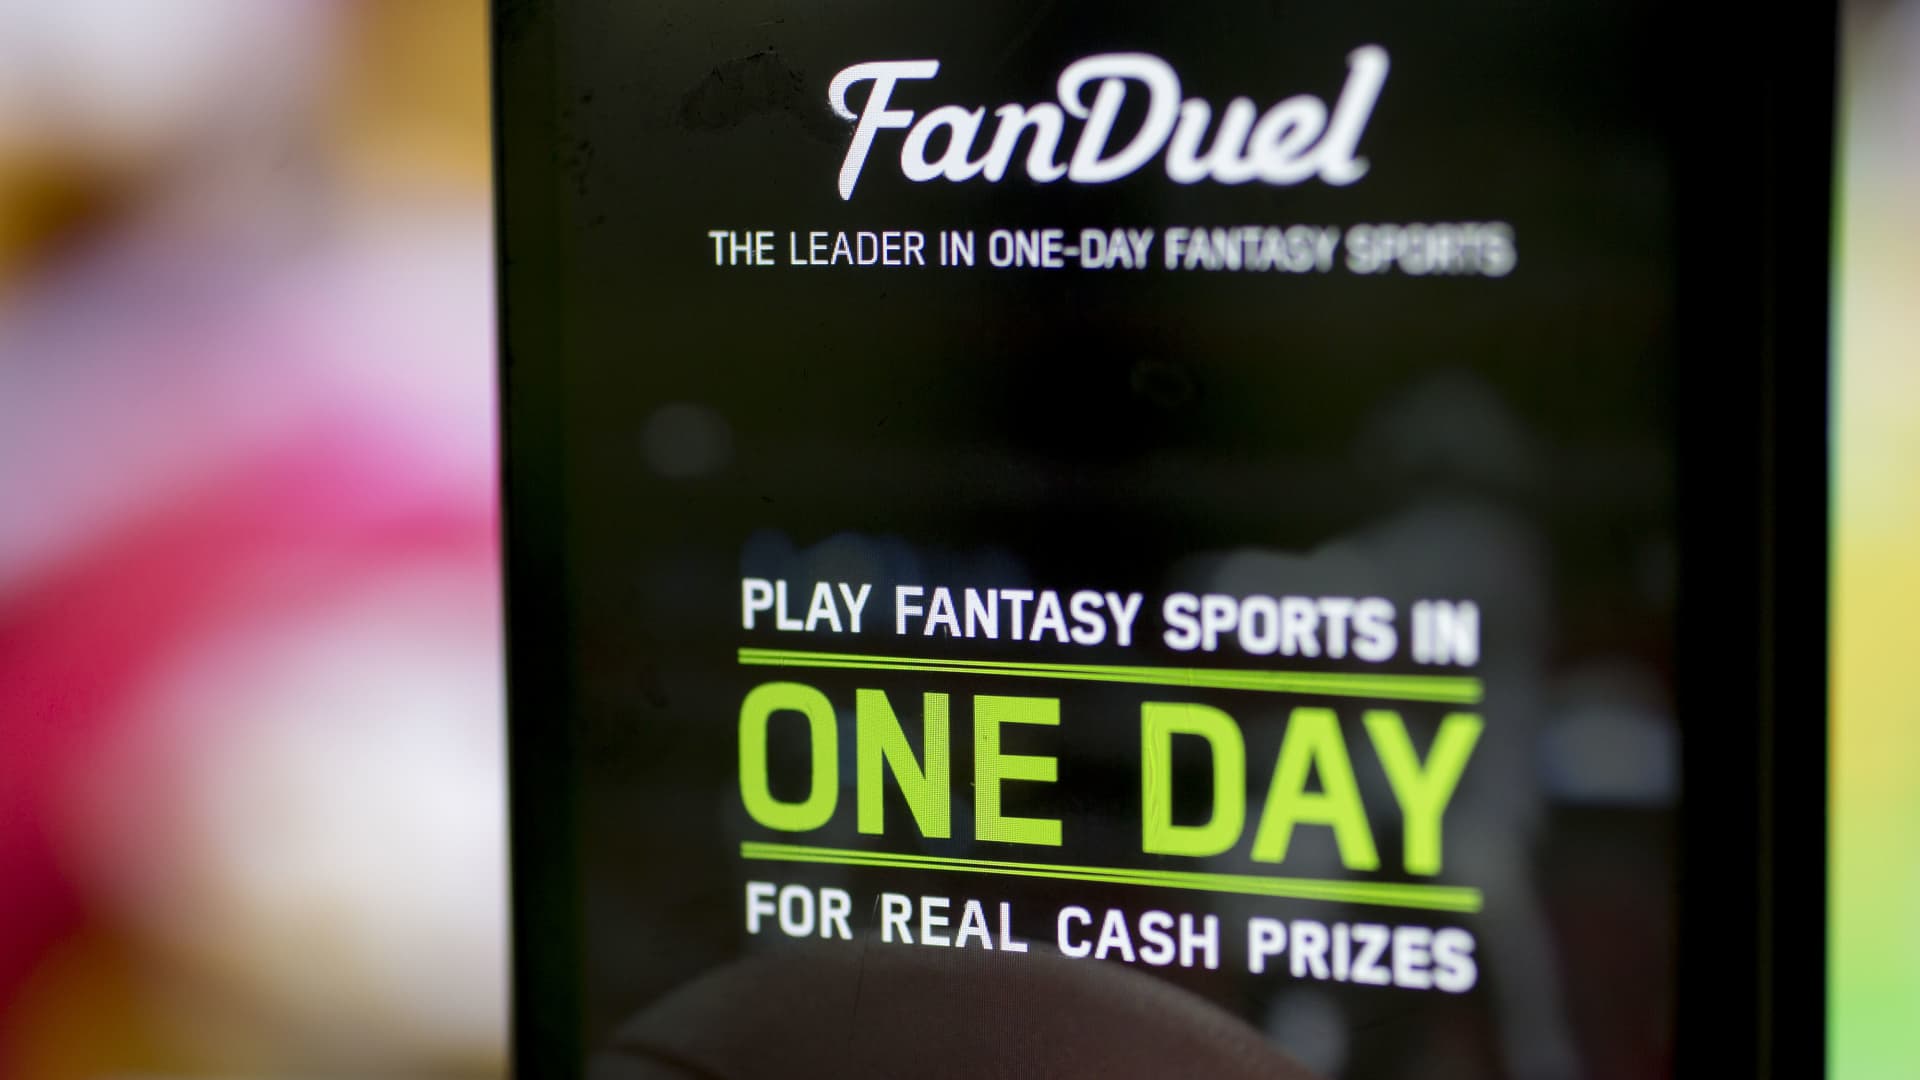 Fox wins right to buy a stake in FanDuel, but not at the price it wanted